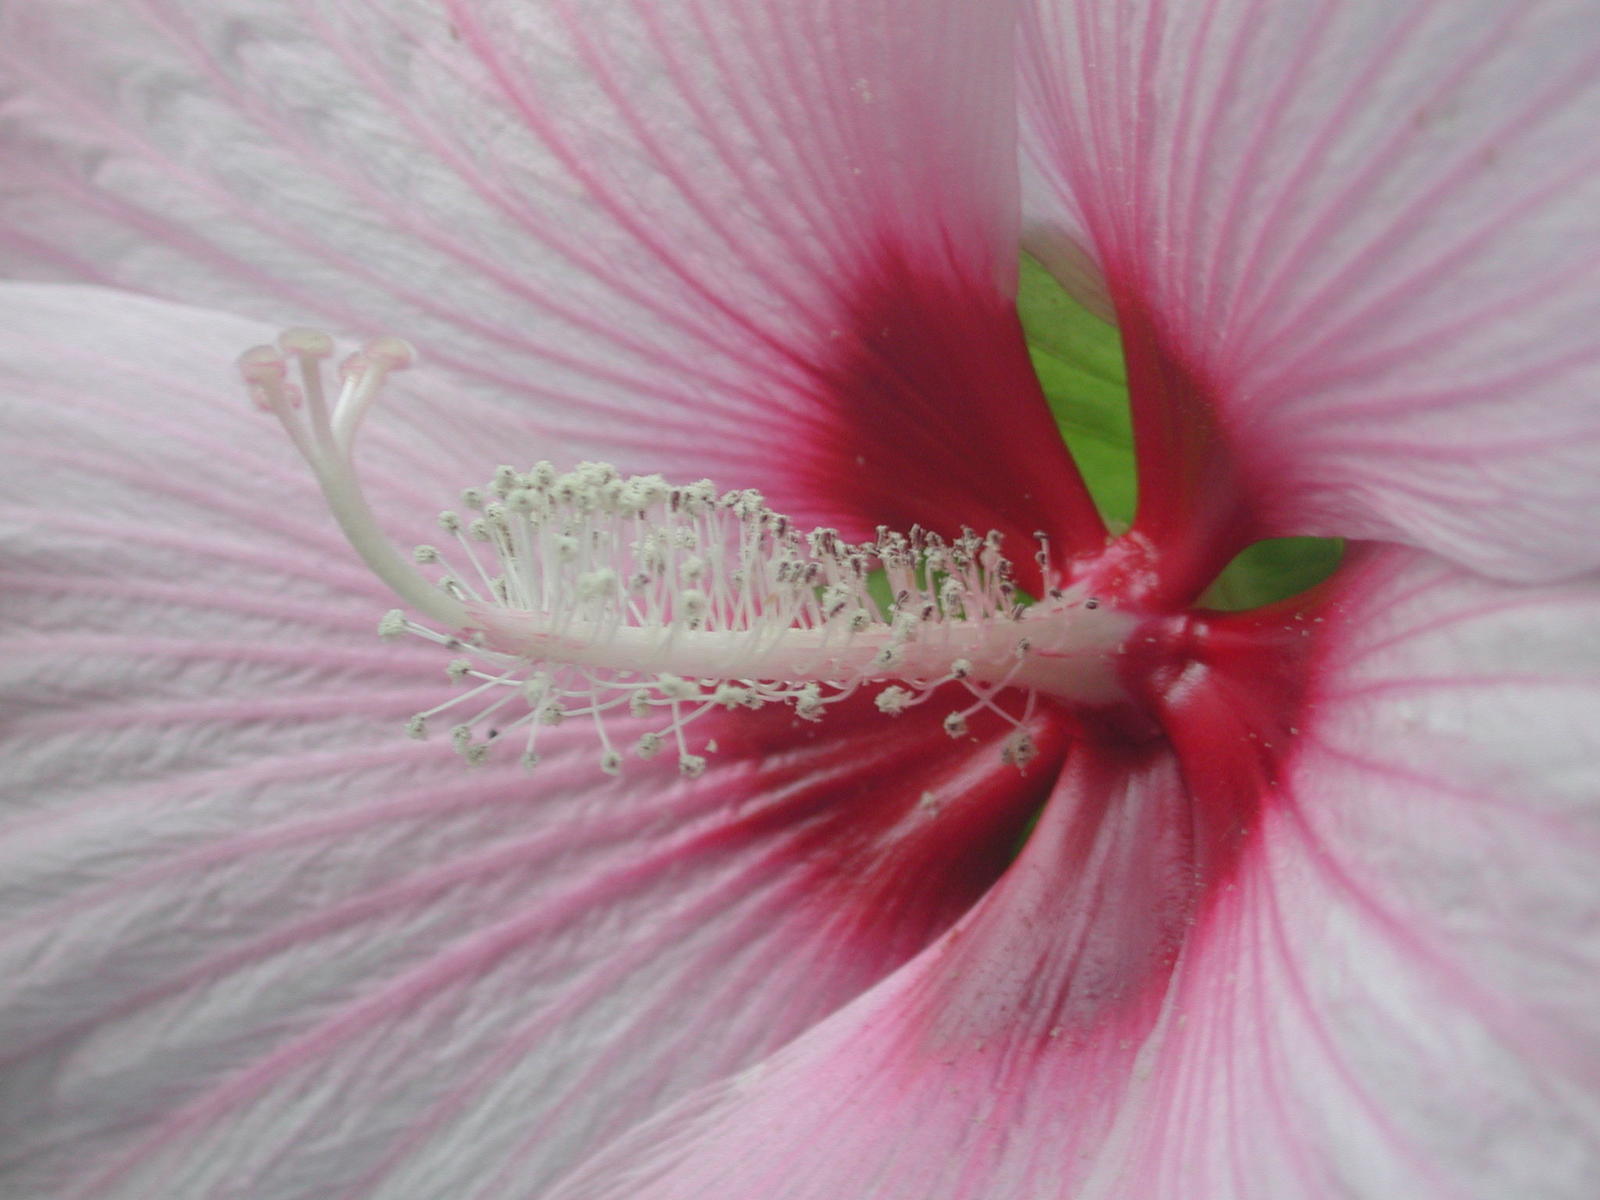 the top half of a large pink flower